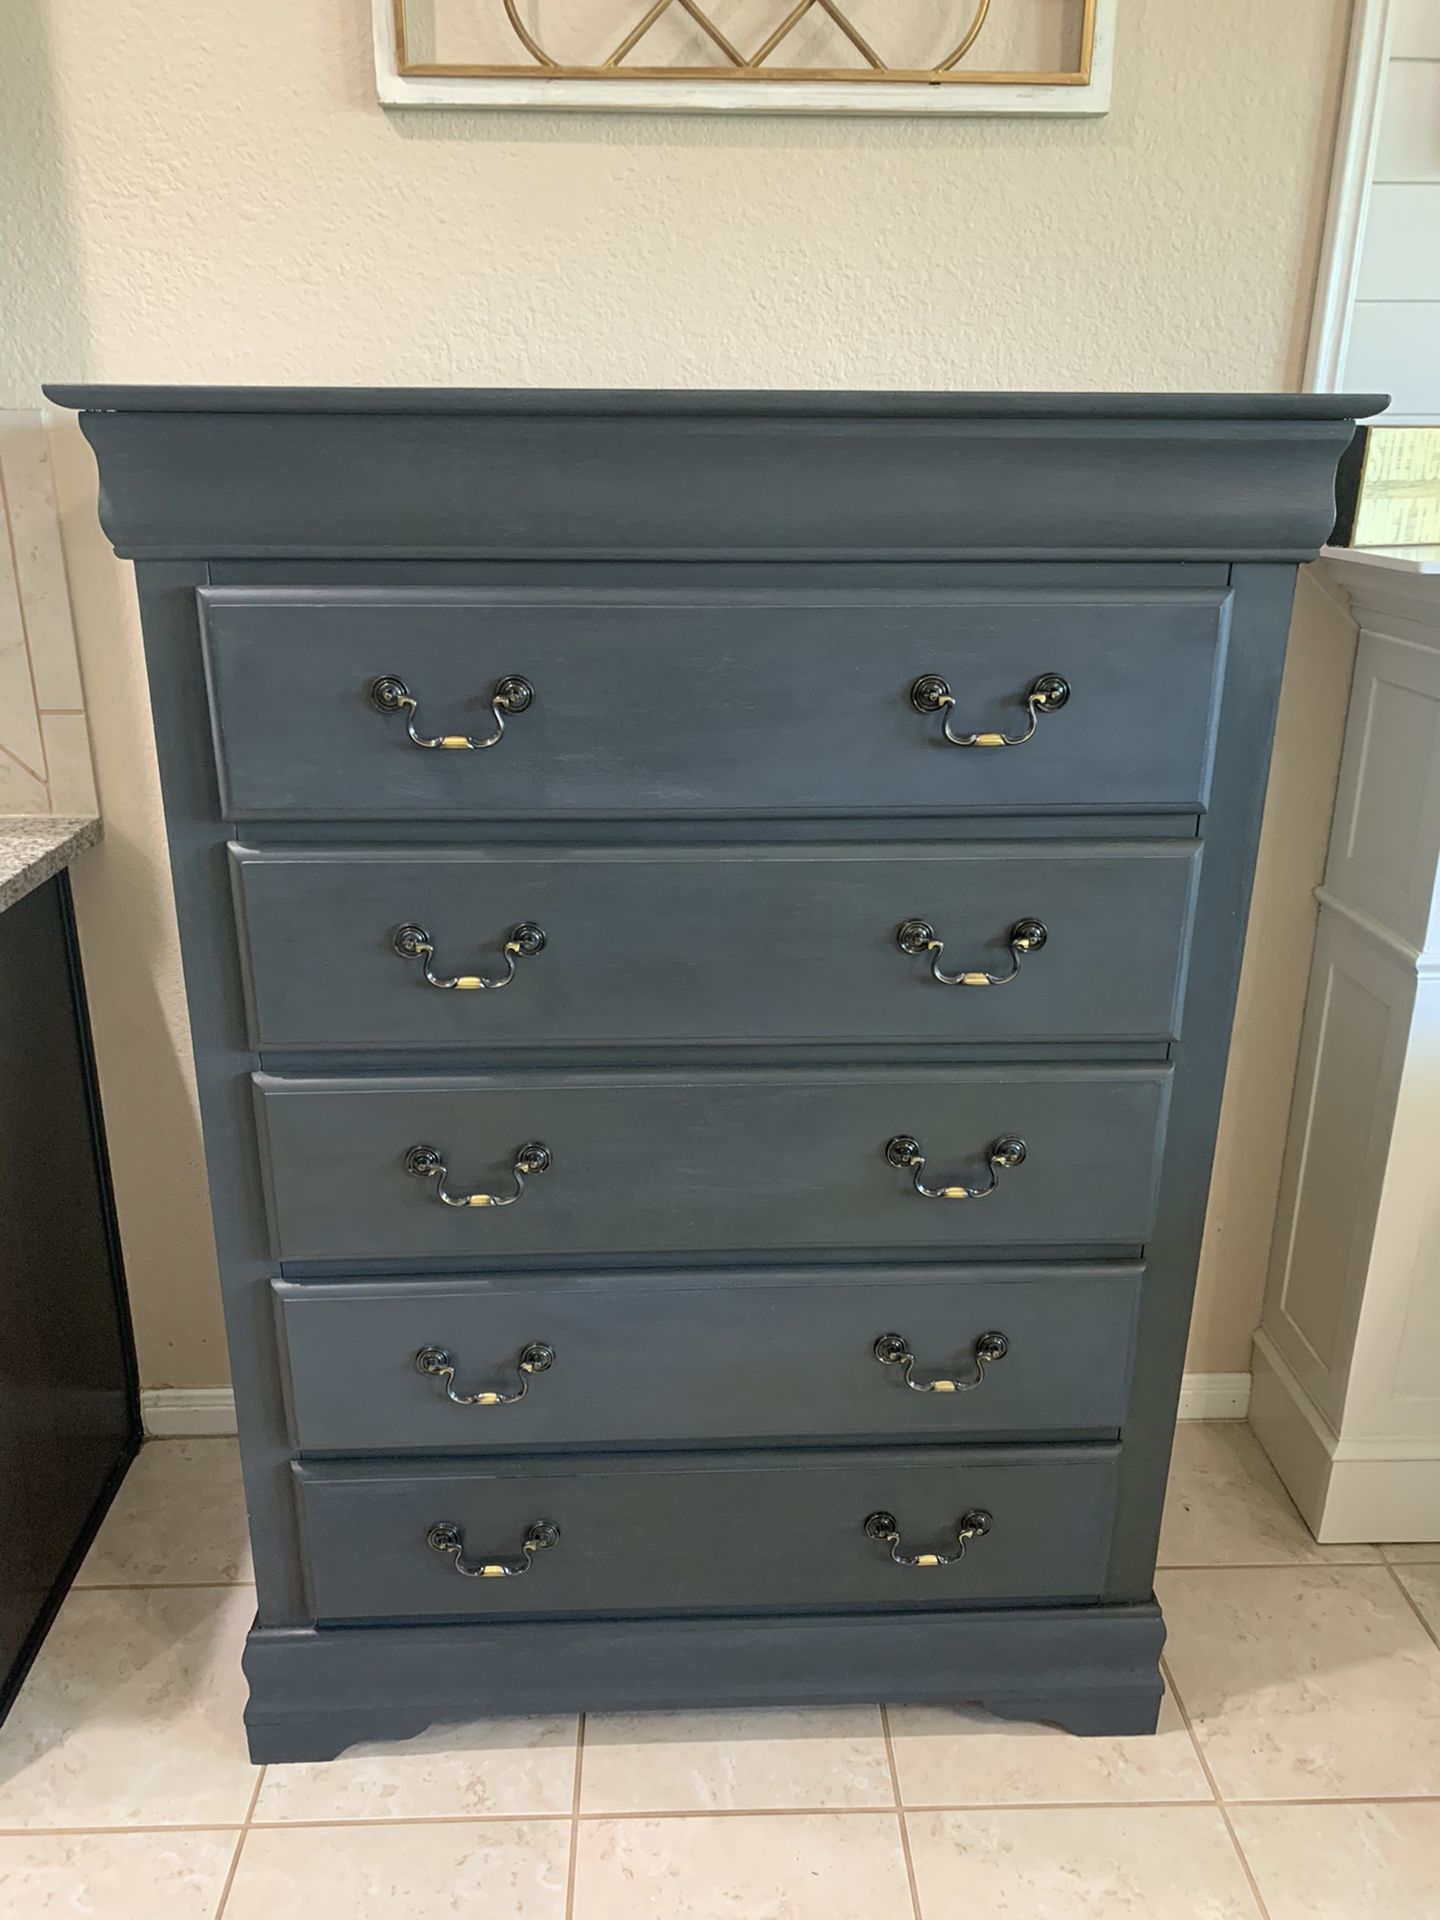 2 Newly Refurbished Charcoal Grey Gray Wood Dressers Chests Drawers